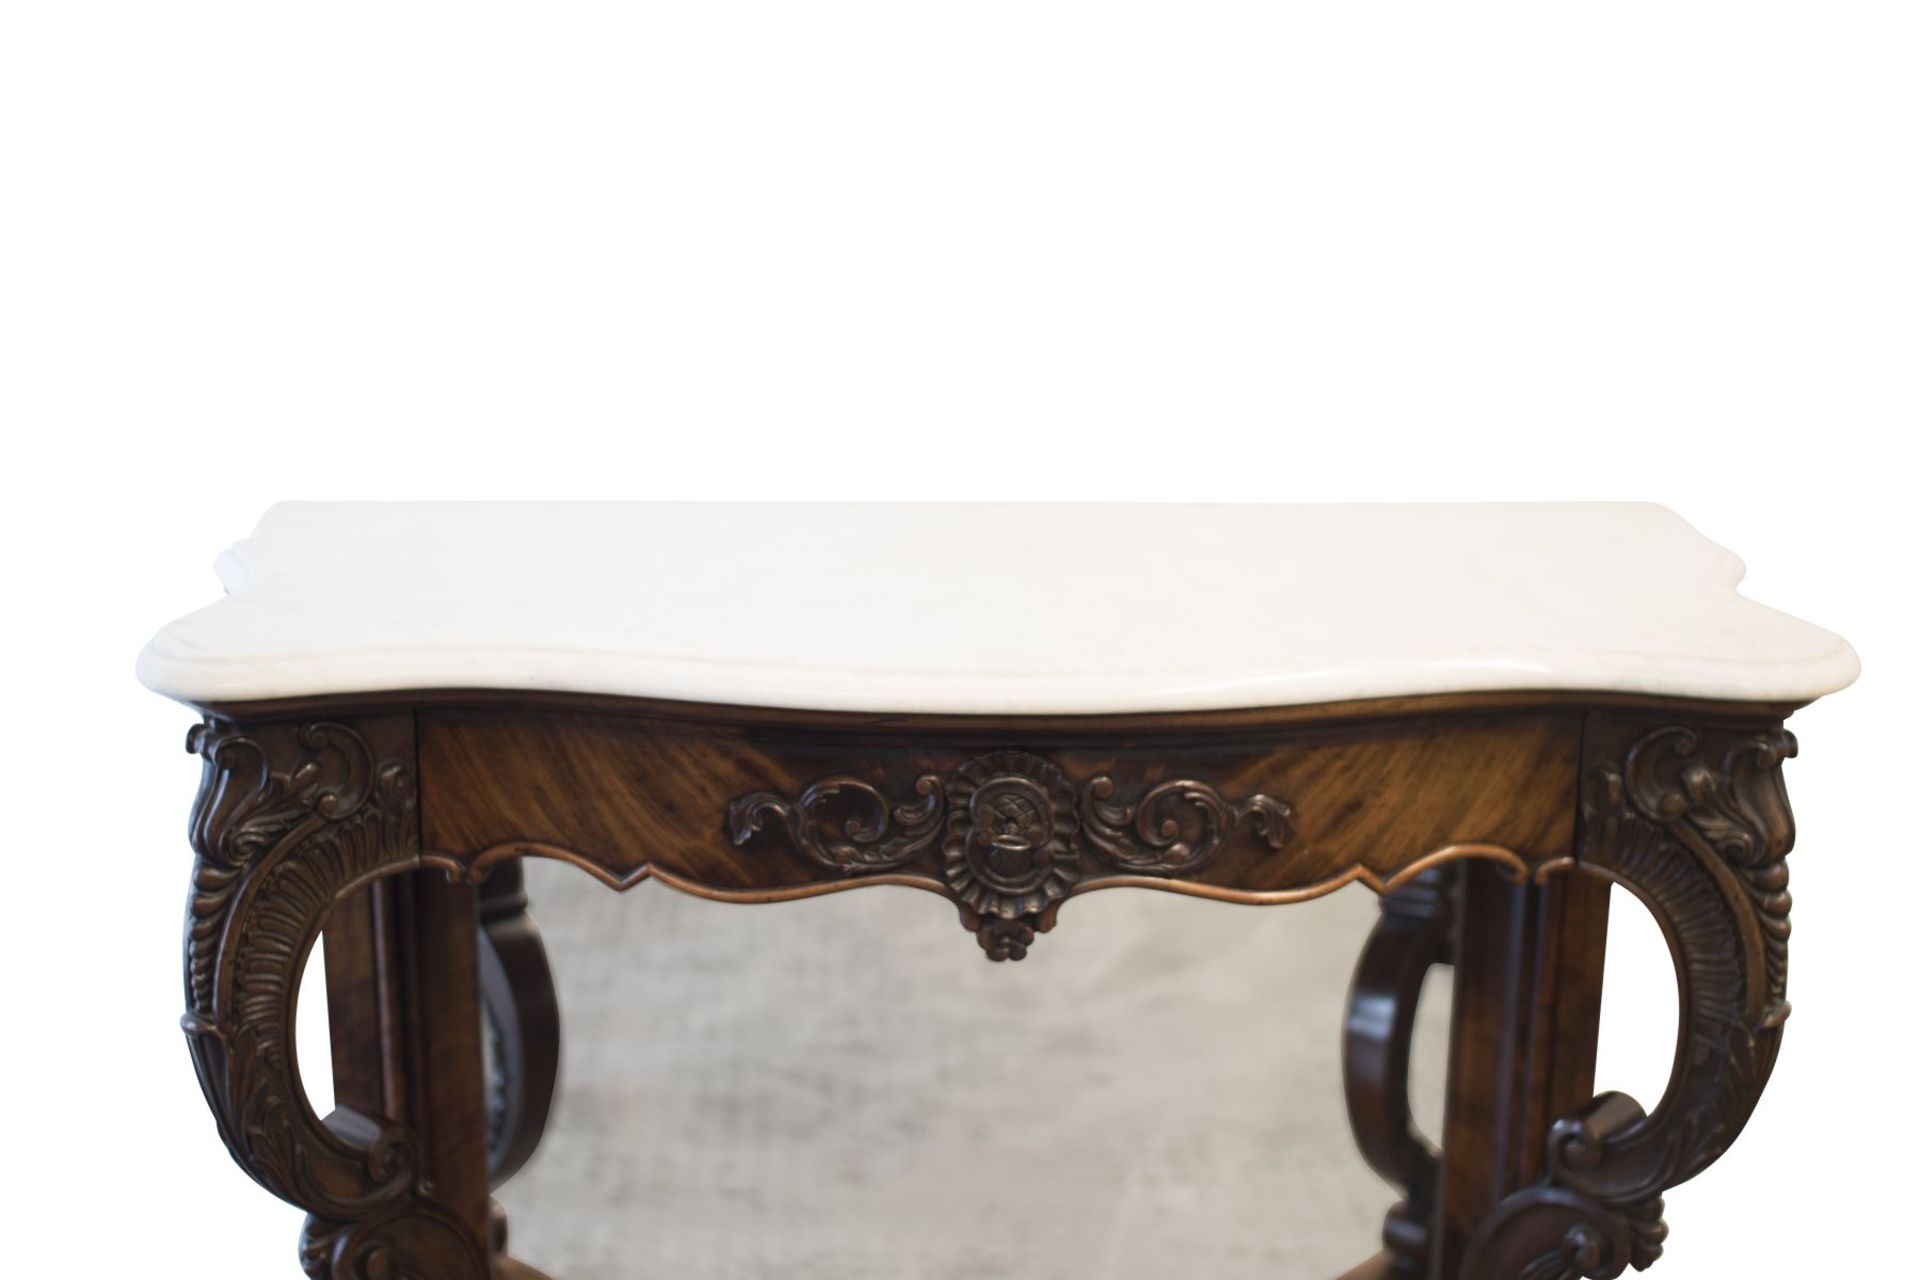 Baroque Sideboard with Mirror and Marble Top | Barock Buffet mit Spiegel und Marmorplatte - Image 5 of 6